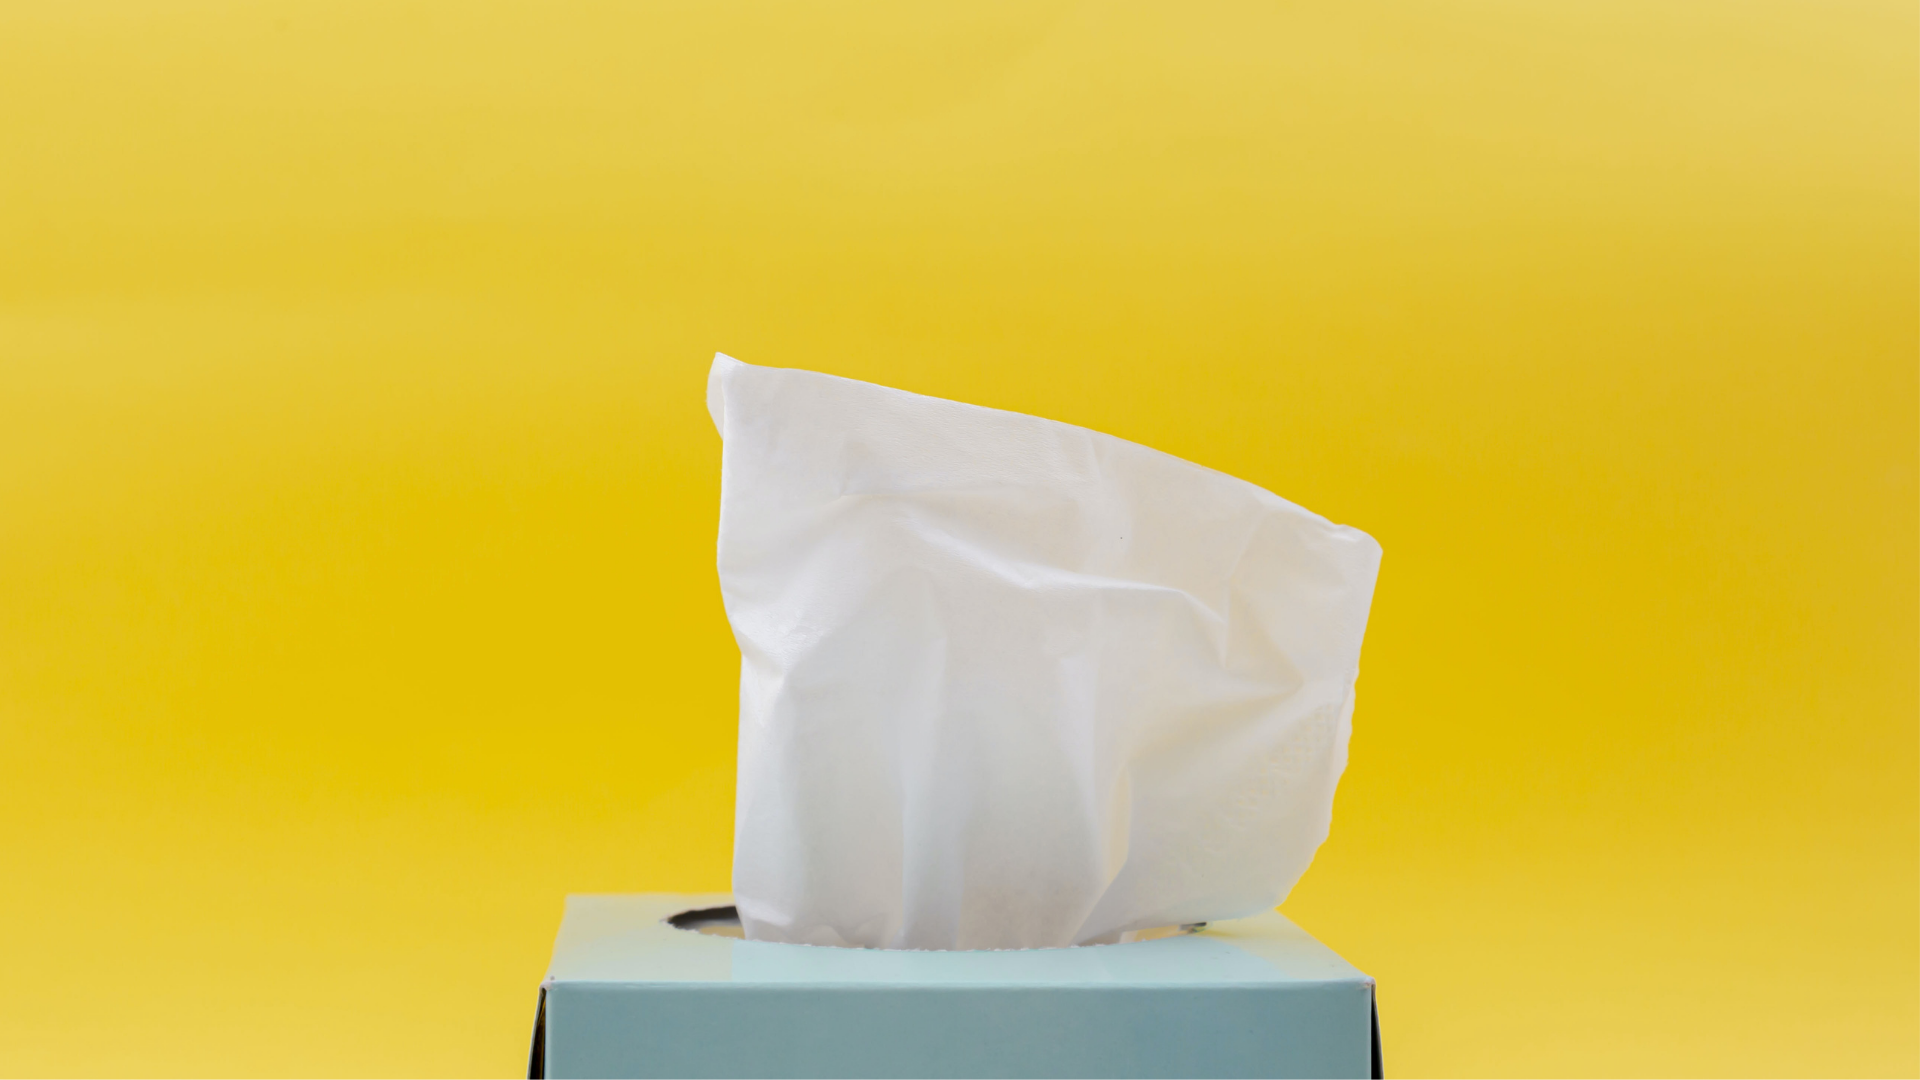 pale blue tissue box sitting in front of a yellow background